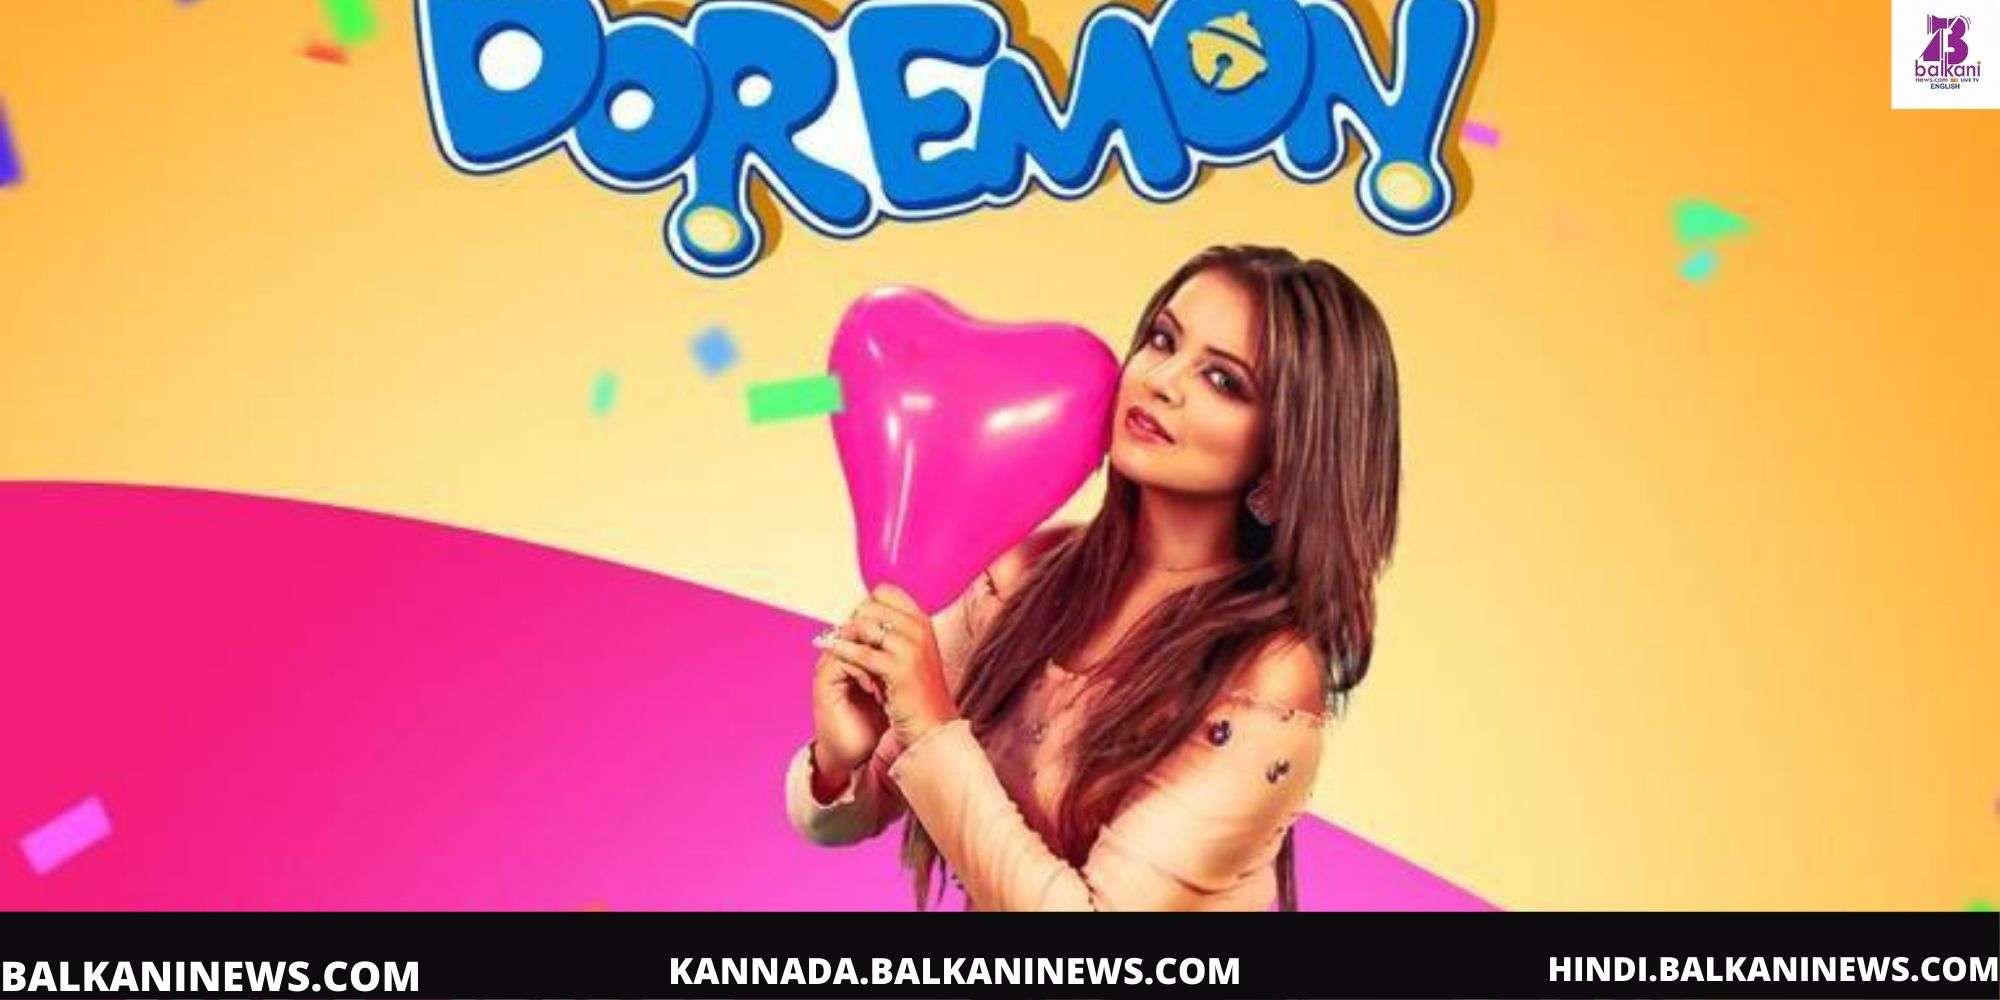 "Canadian Live Basanti AKA Rini Chandra’s new song Doremon is Out".